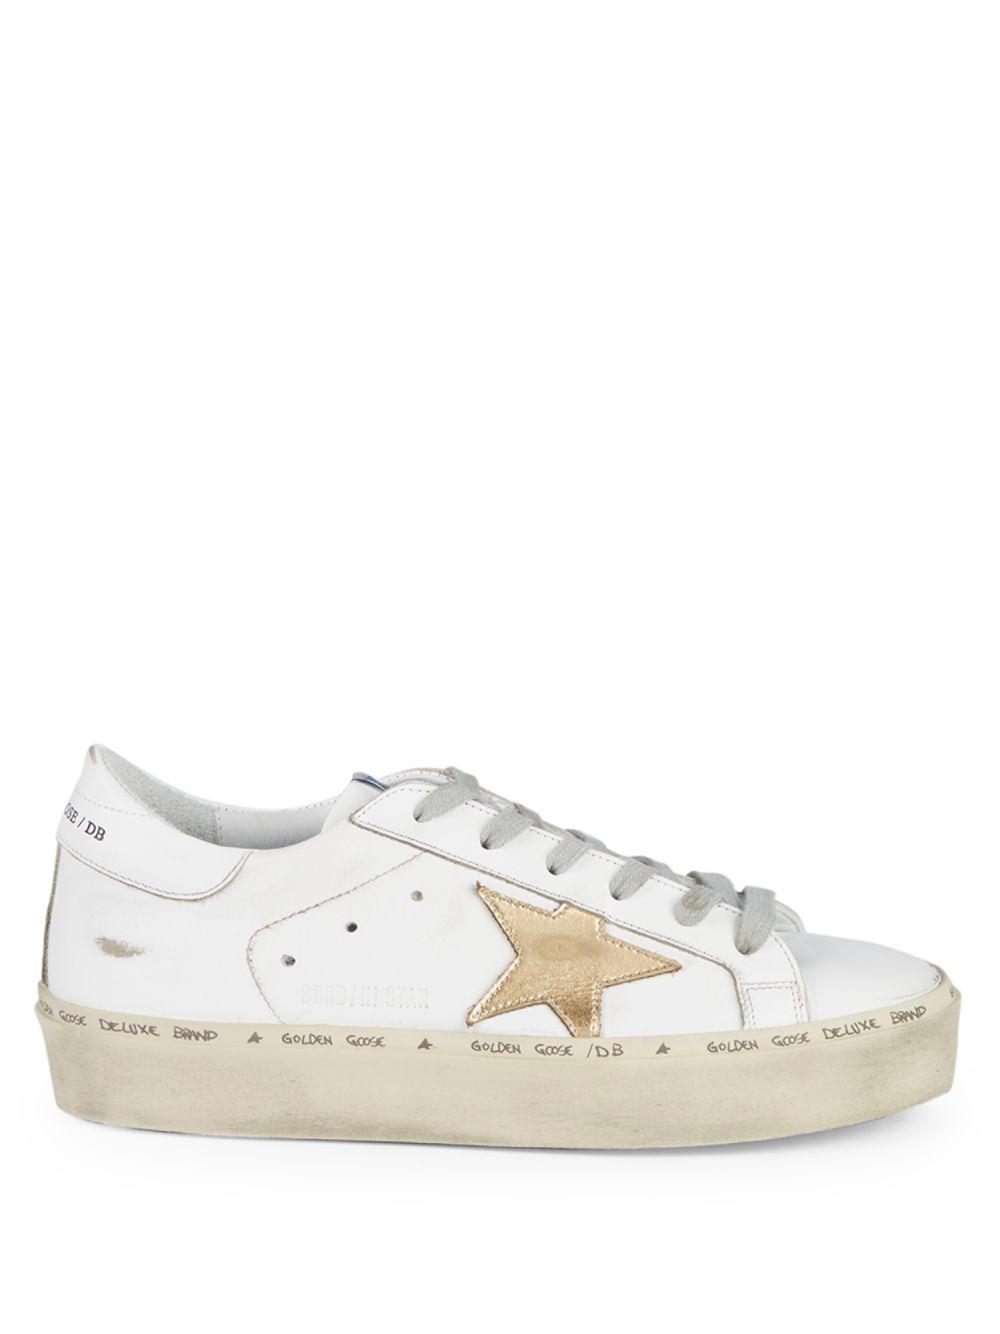 Golden Goose Deluxe Brand Logo Leather Platform Sneakers in White - Lyst